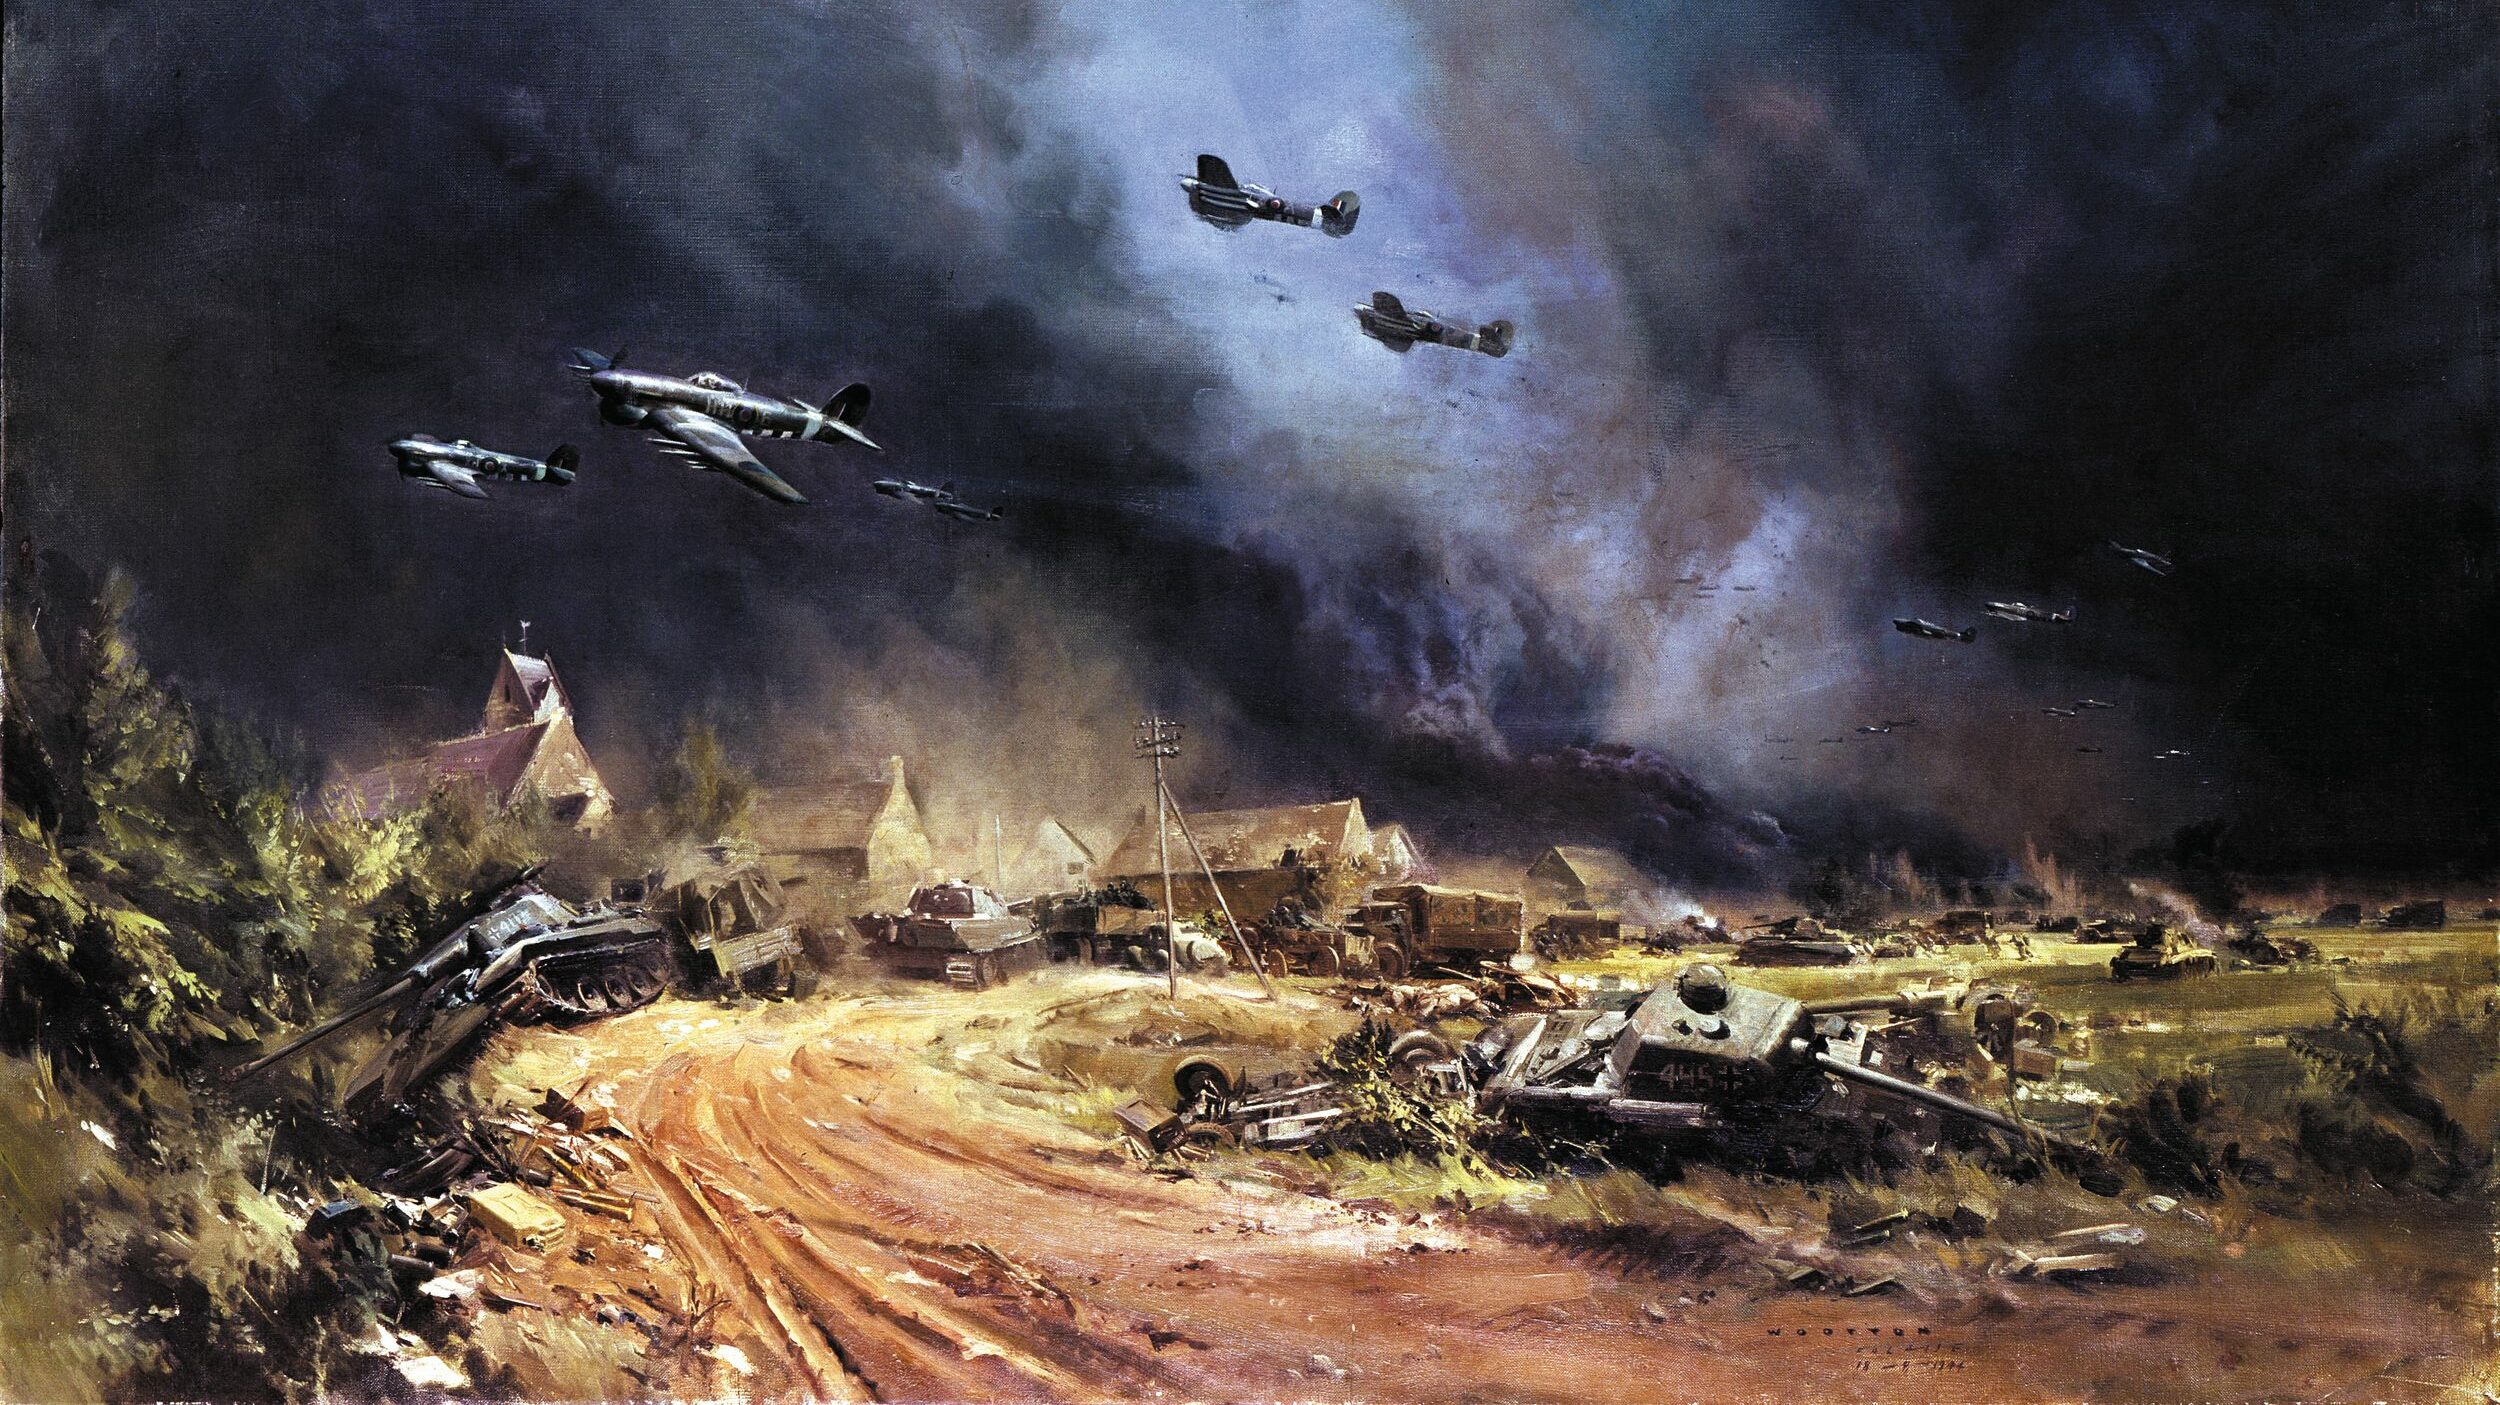 Rocket-firing British Typhoons lay down a deadly barrage on German armor attempting to escape through the Falaise Gap in Normandy following the American breakout at St. Lo.